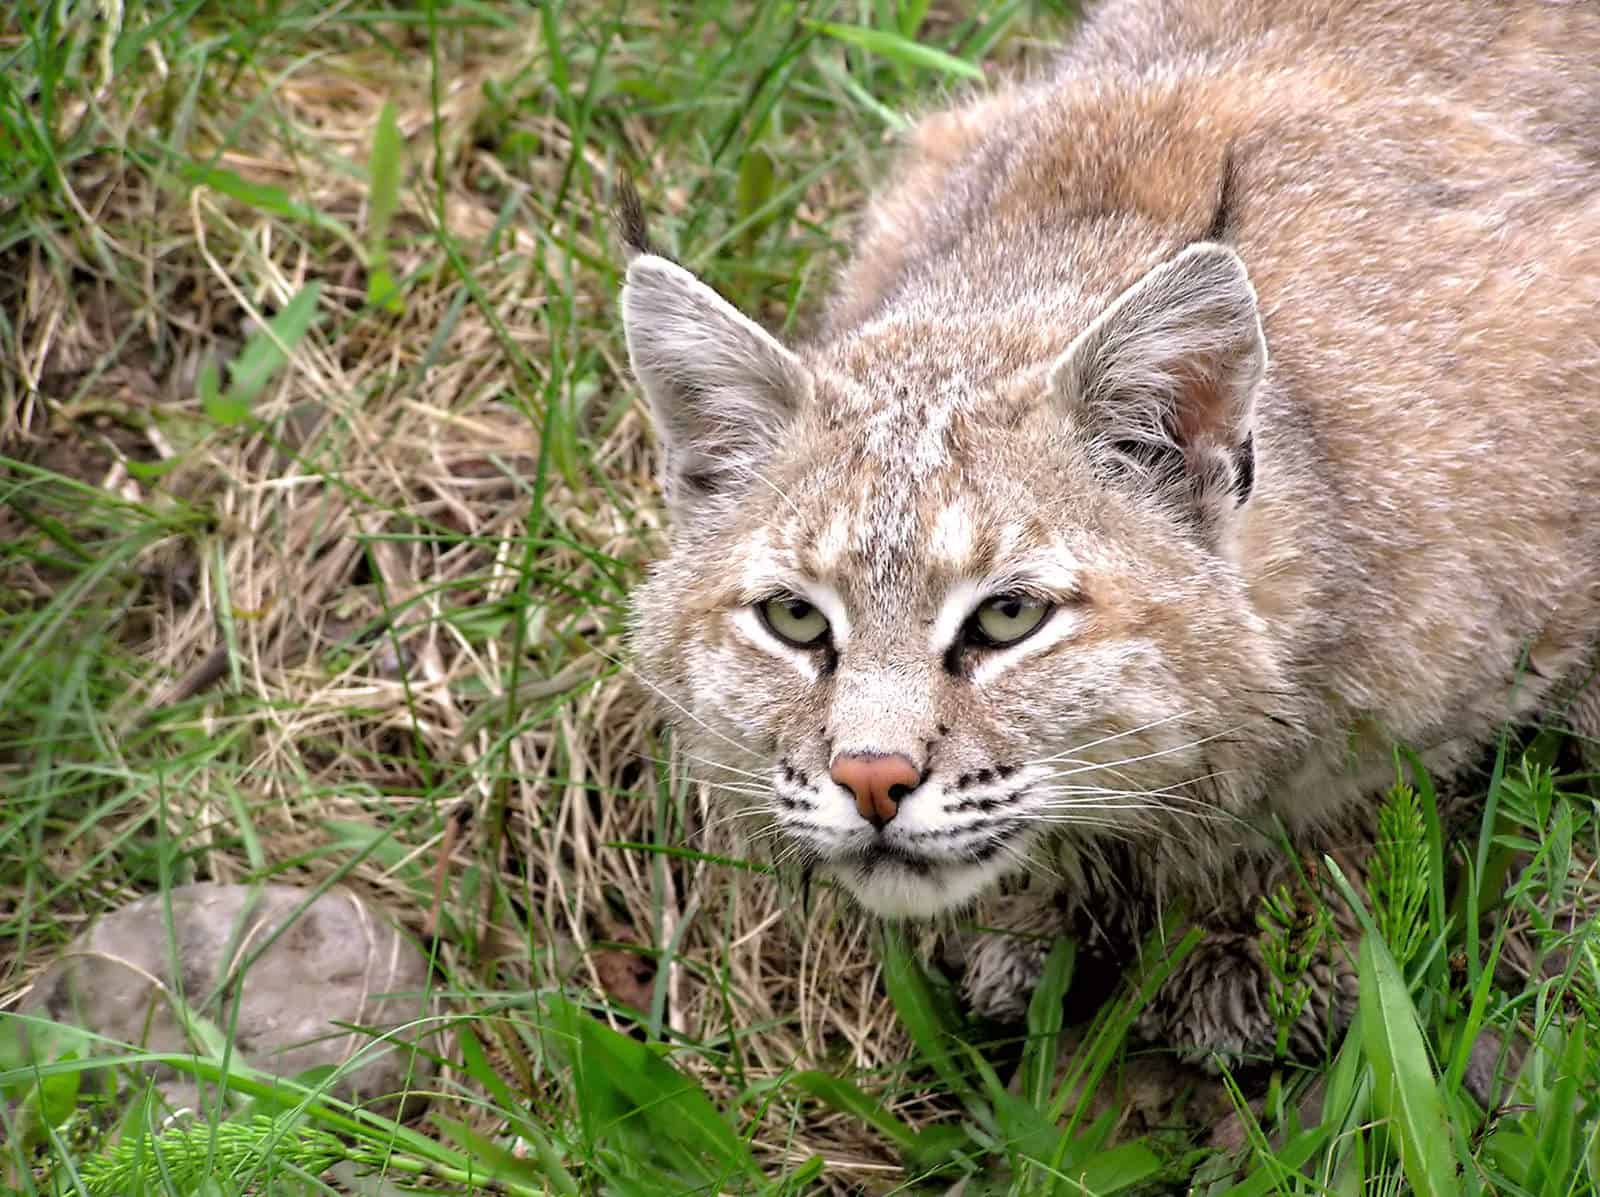 A bobcat focused on stalking its prey from a wet grasses